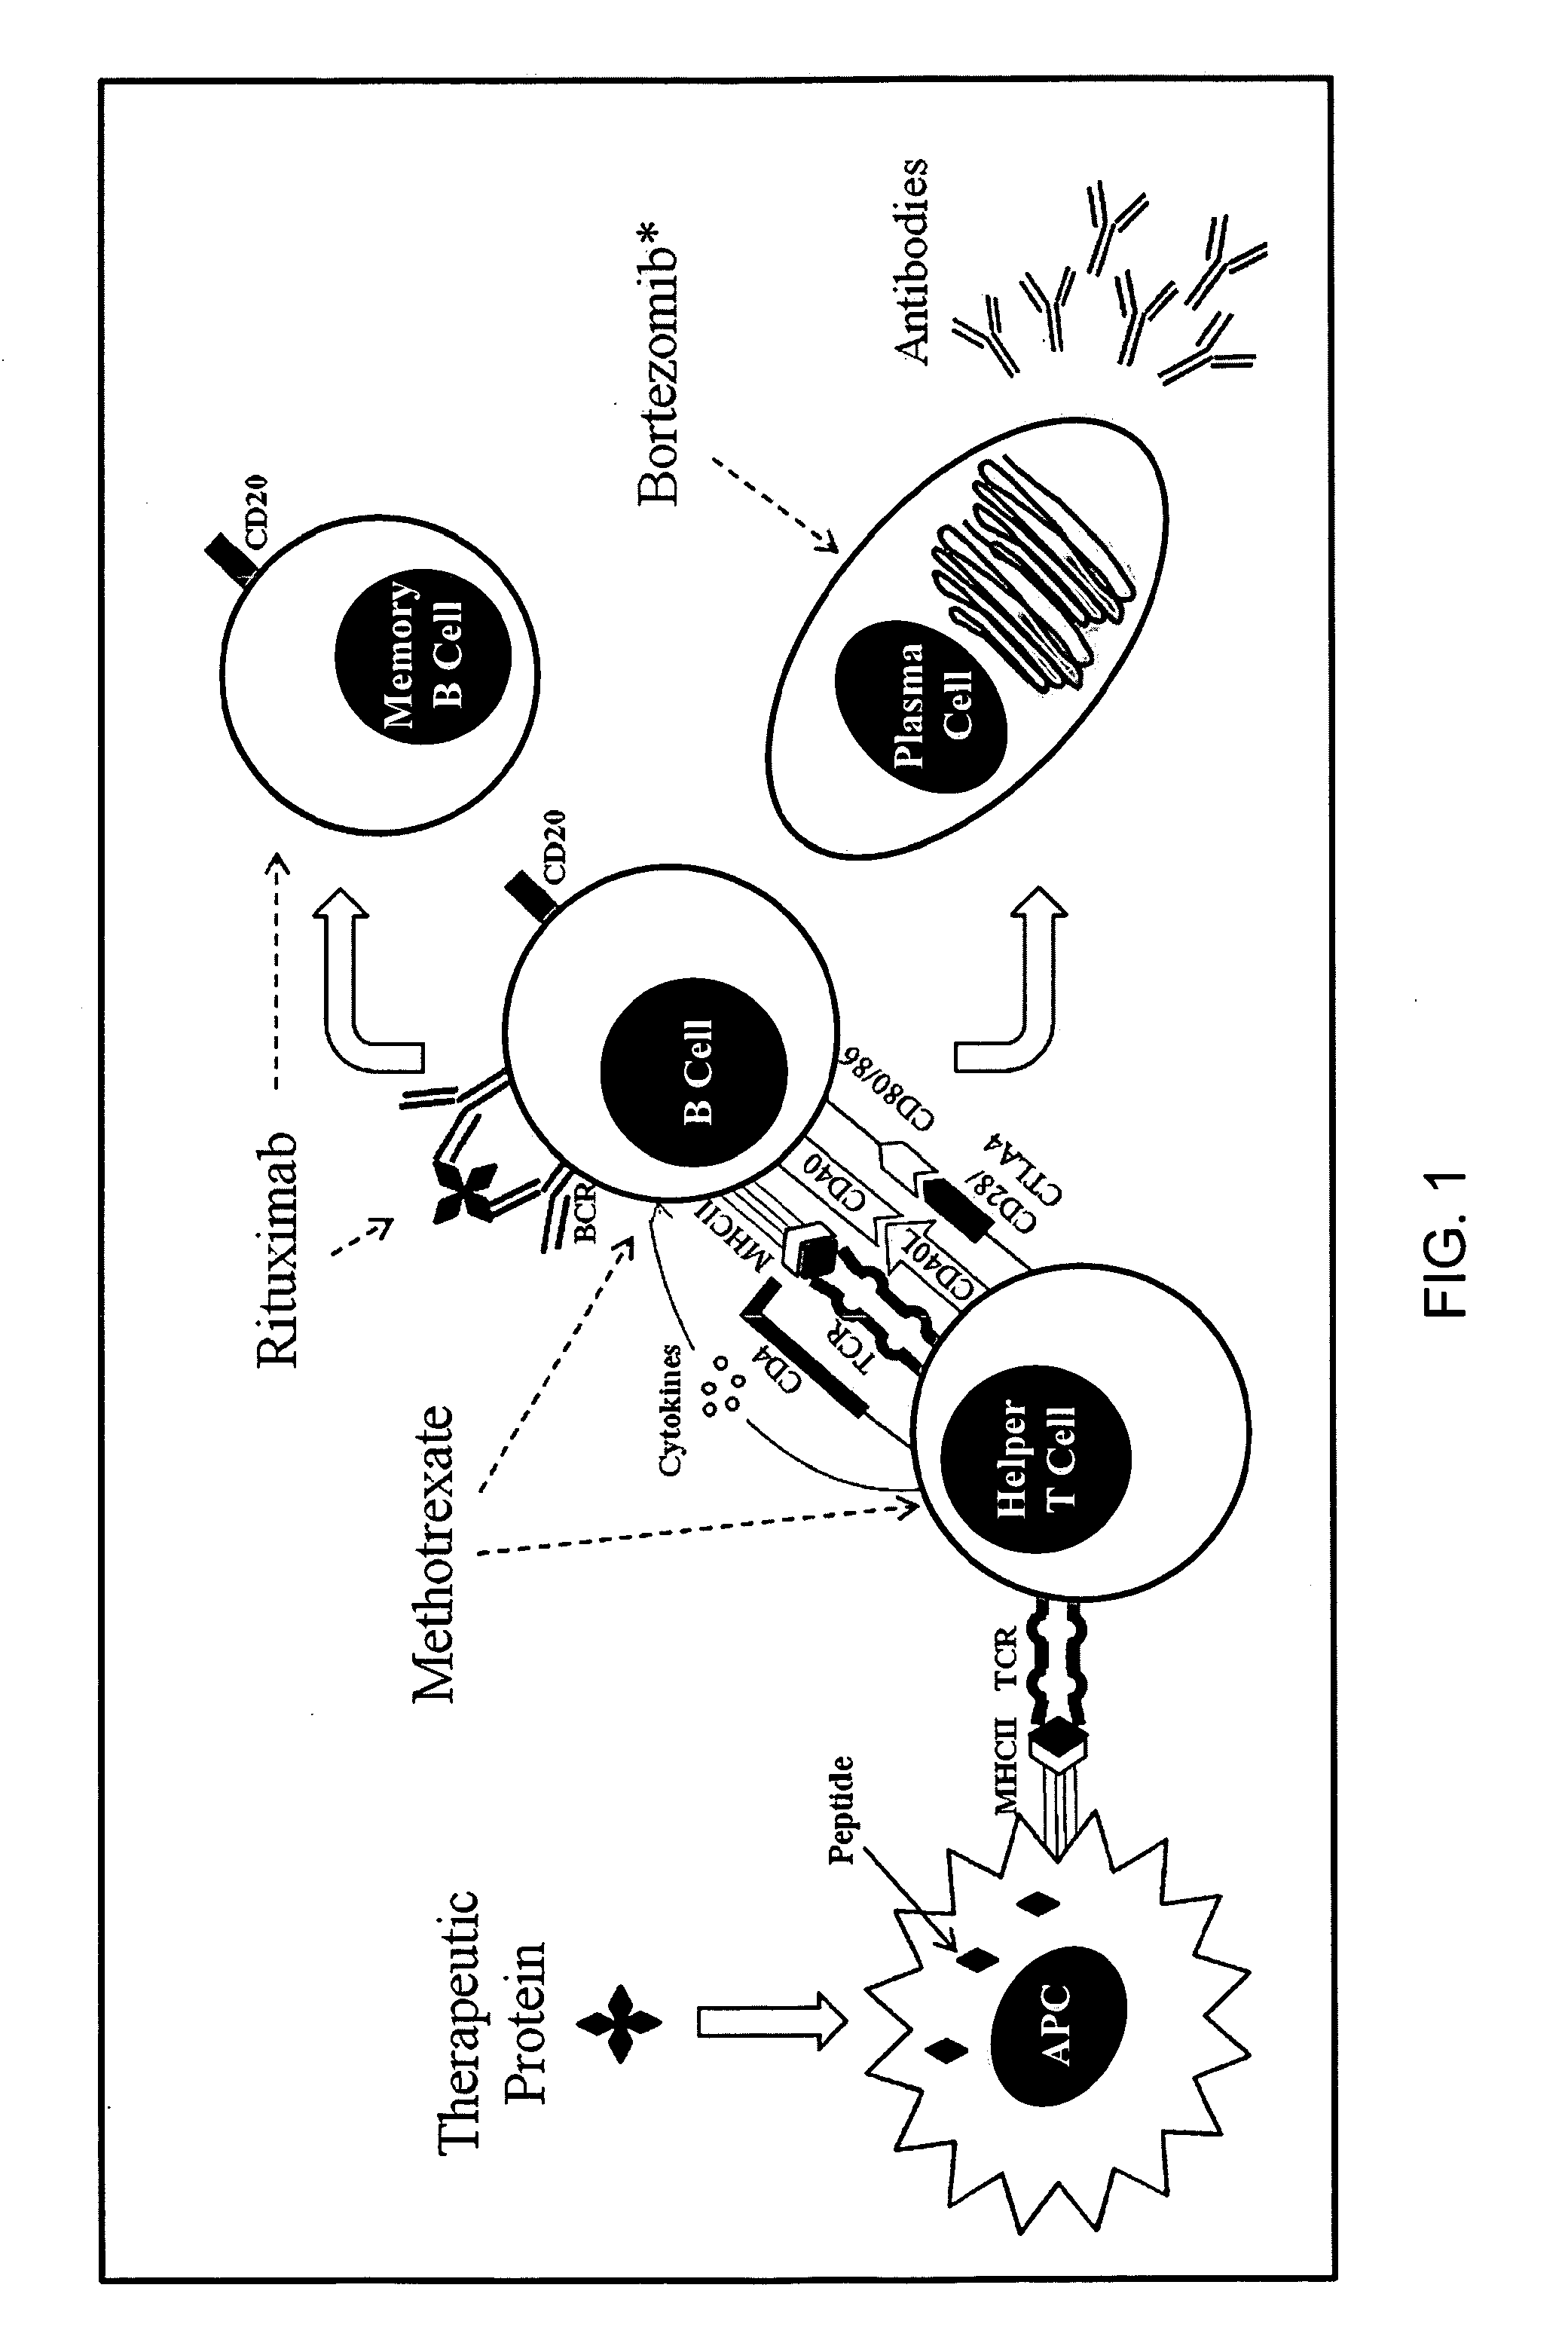 Method of treating patients undergoing protein replacement therapy, gene replacement therapy, or other therapeutic modalities